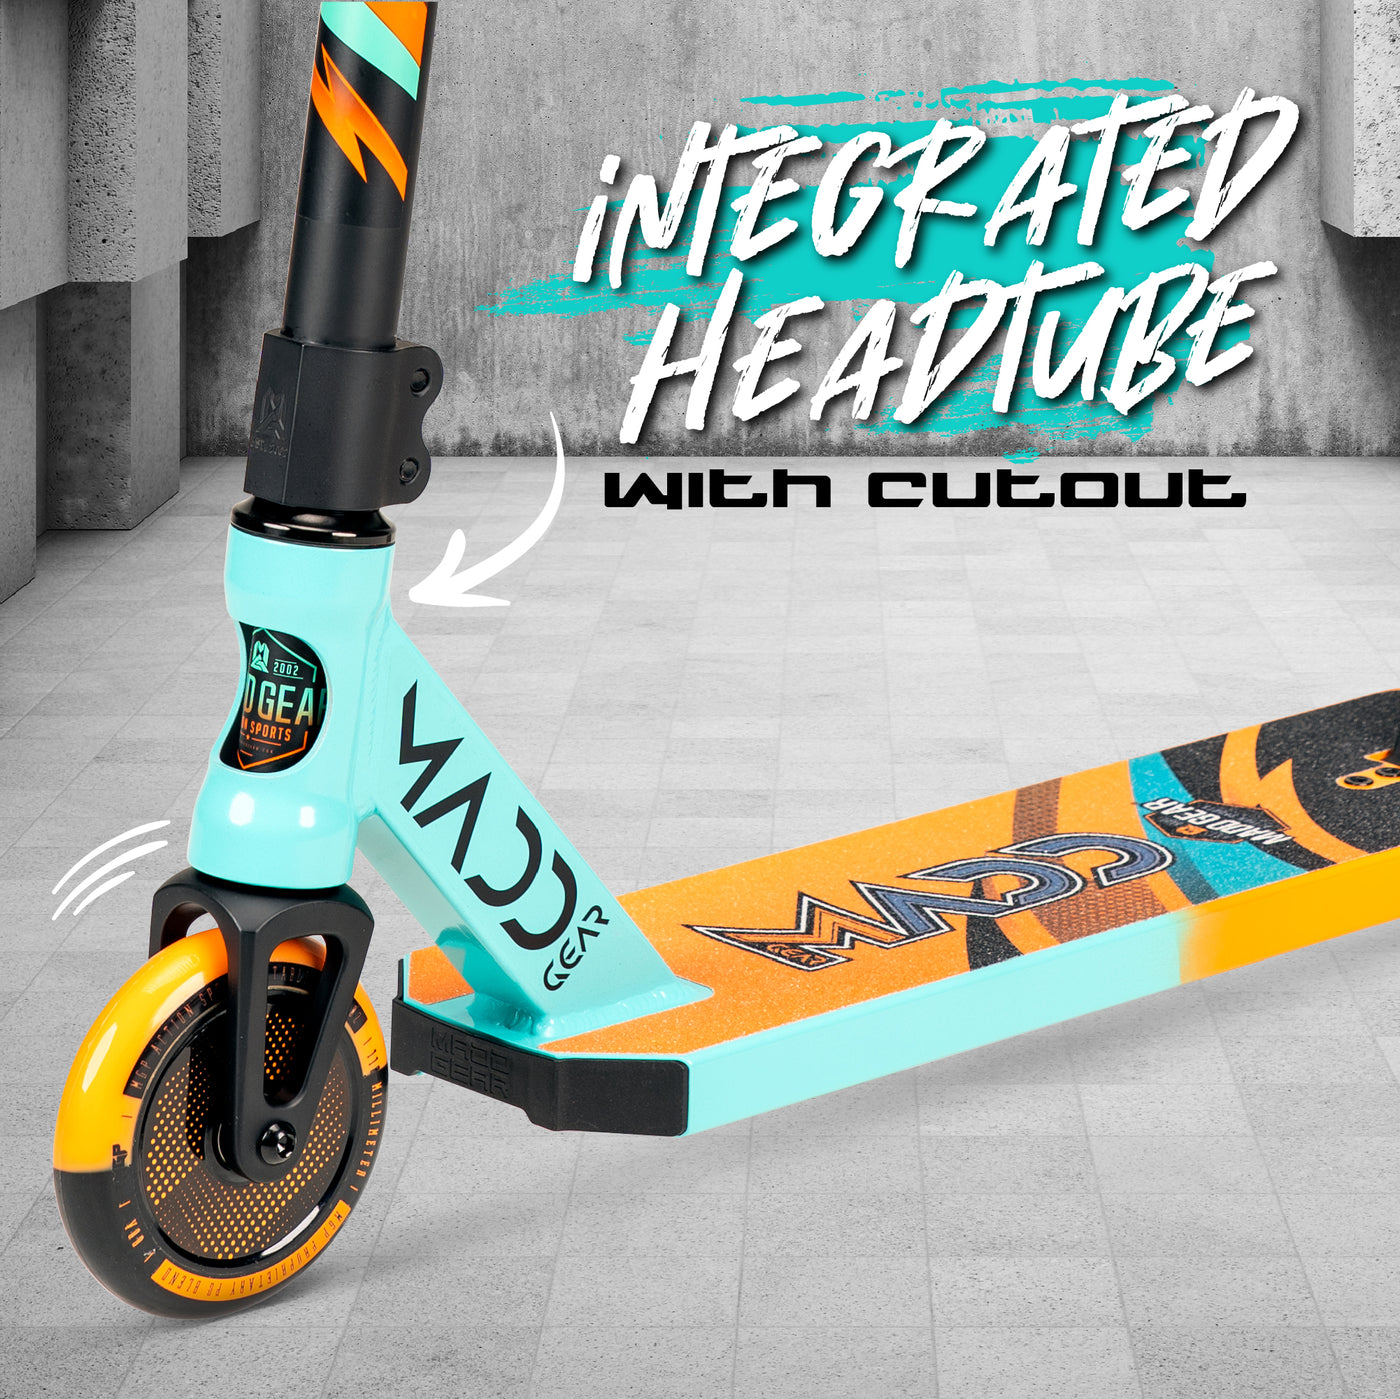 Madd Gear MGP Kick Pro Stunt Scooter Complete High Quality Razor Pro Trick Skate Park Mad Teal Orange 5" Deck Integrated Headtube with Cutout